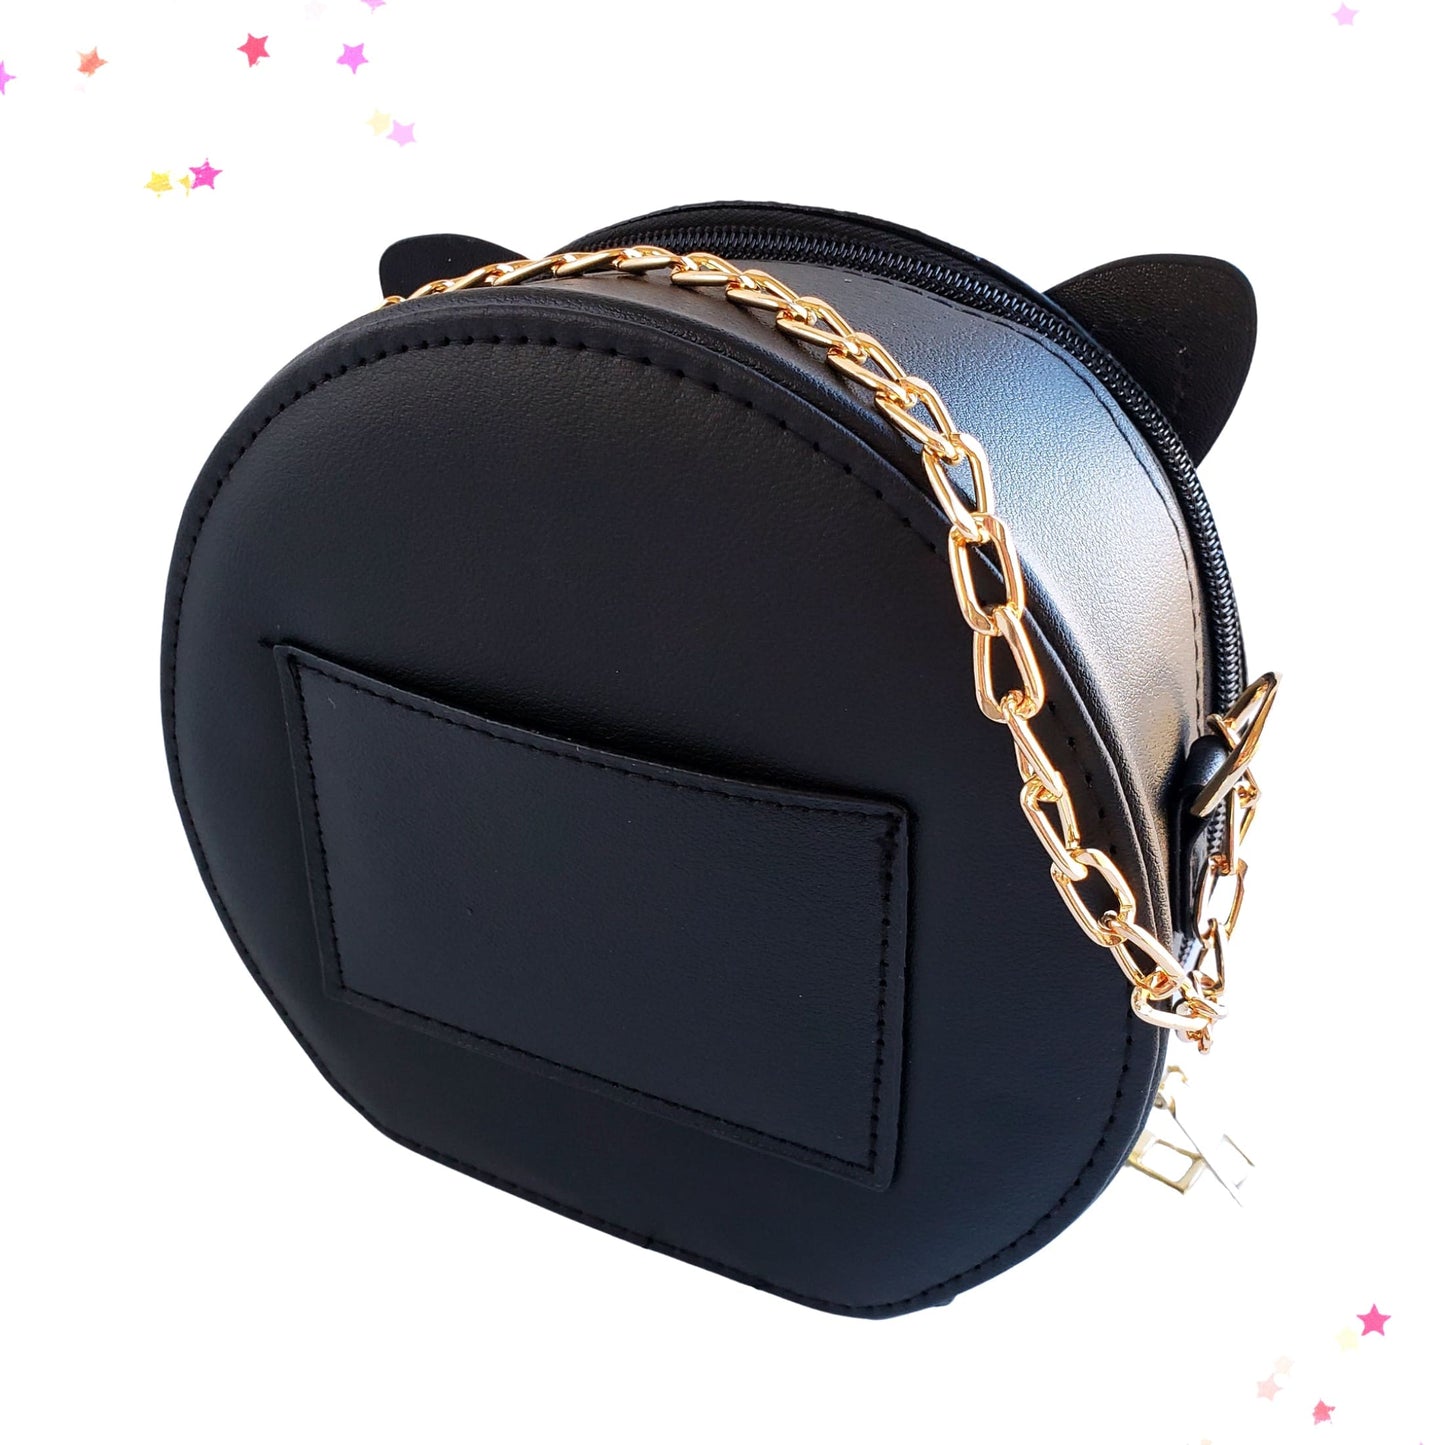 Glittery Black and Gold Cat Face Mini Bag from Confetti Kitty, Only 24.99